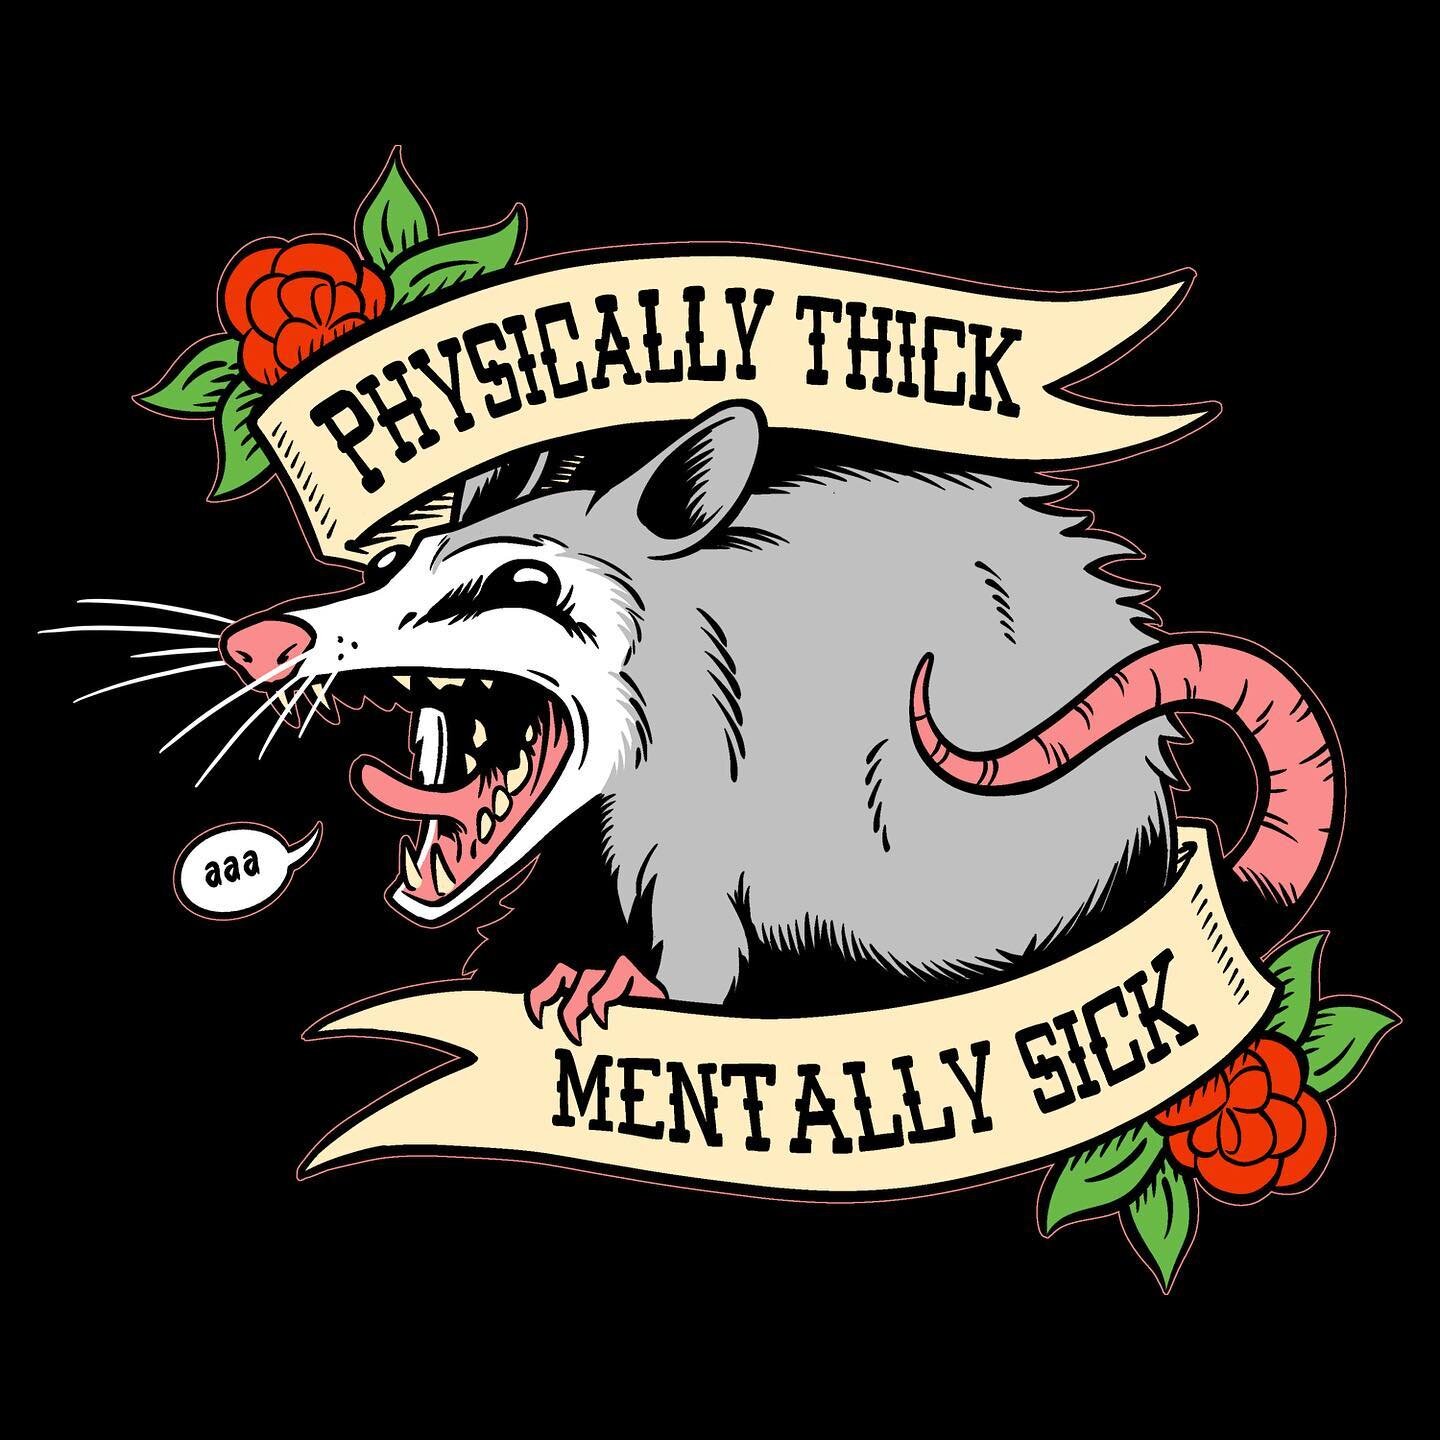 Self care includes acknowledging and embracing your inner trash goblin - also available at @diewithbootson in #salemmassachusetts 
.
.
#hauntwares #possum #goblincore #thicc #tattooflash